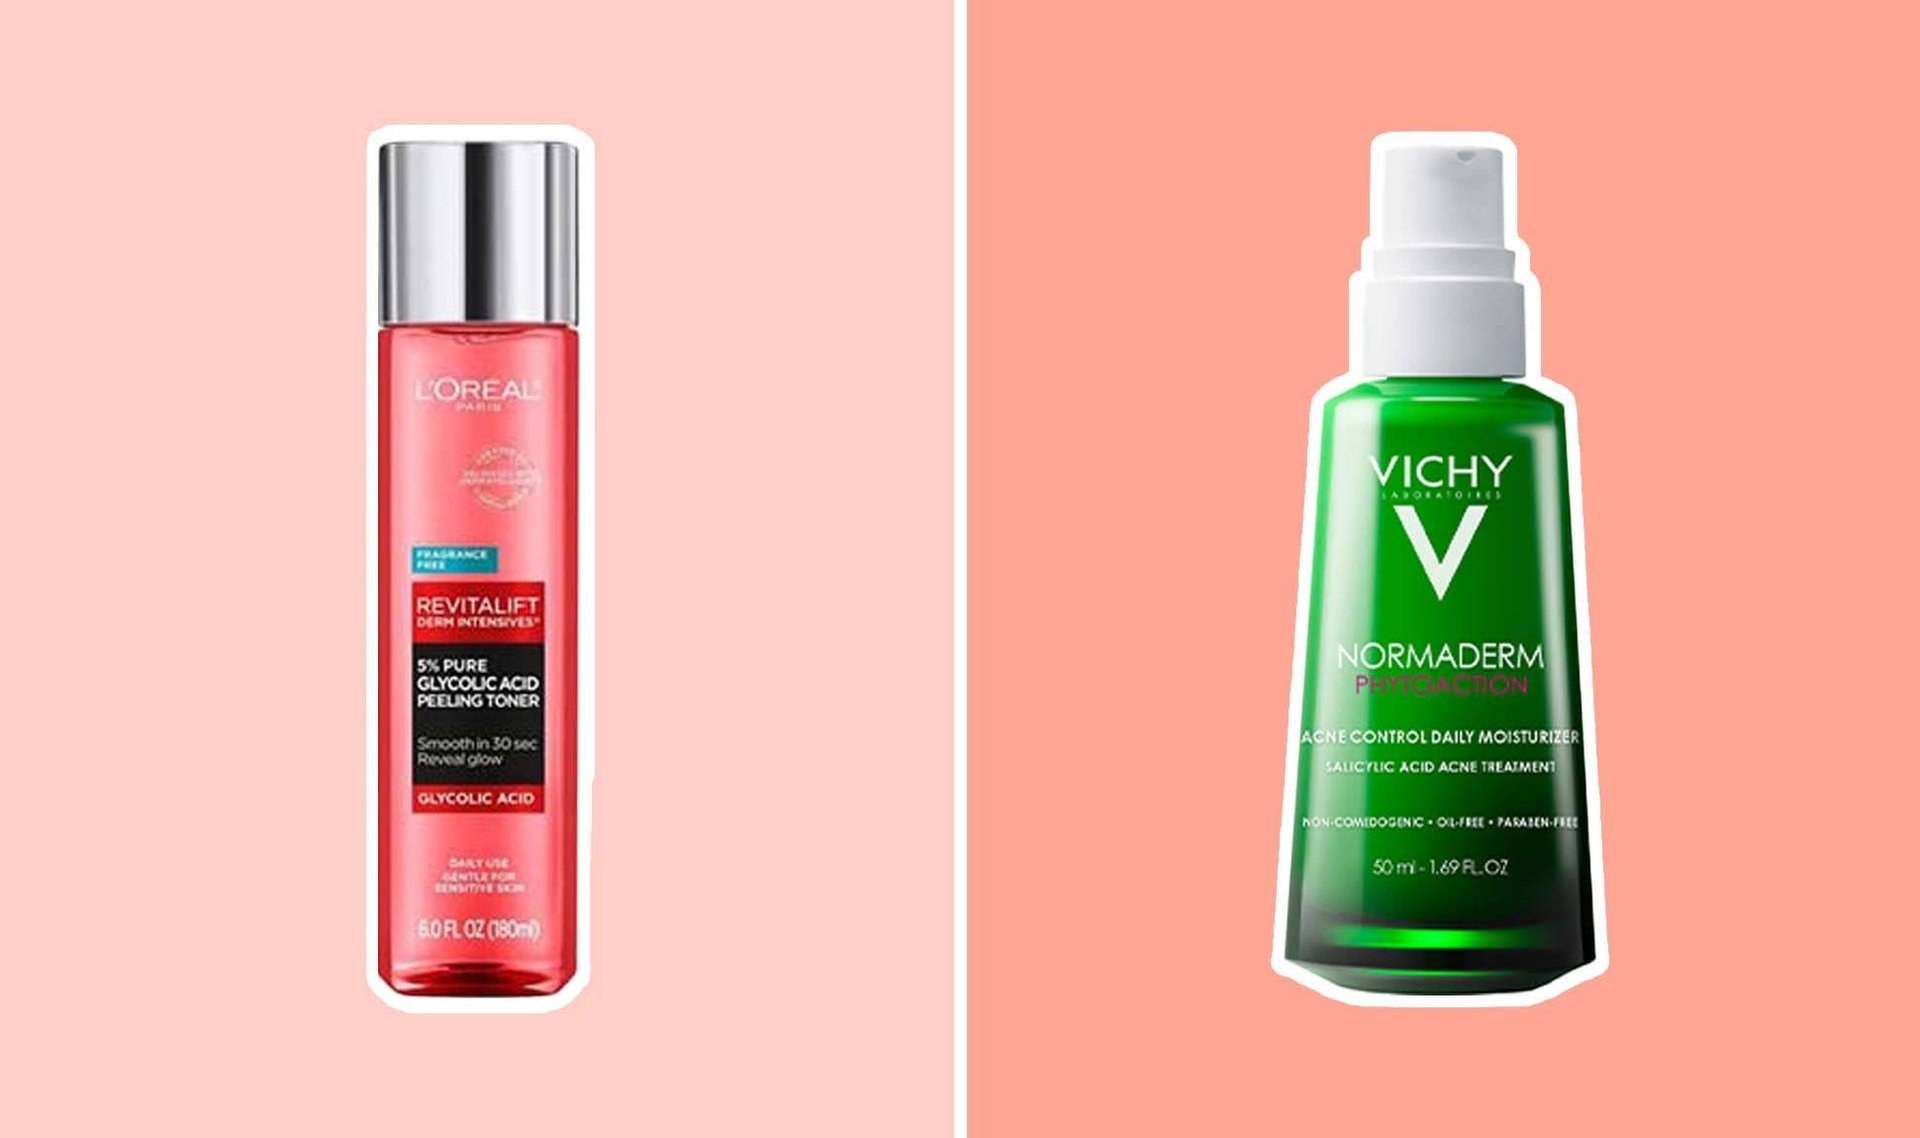 photo of L'Oreal Paris and Vichy skincare products on pink background